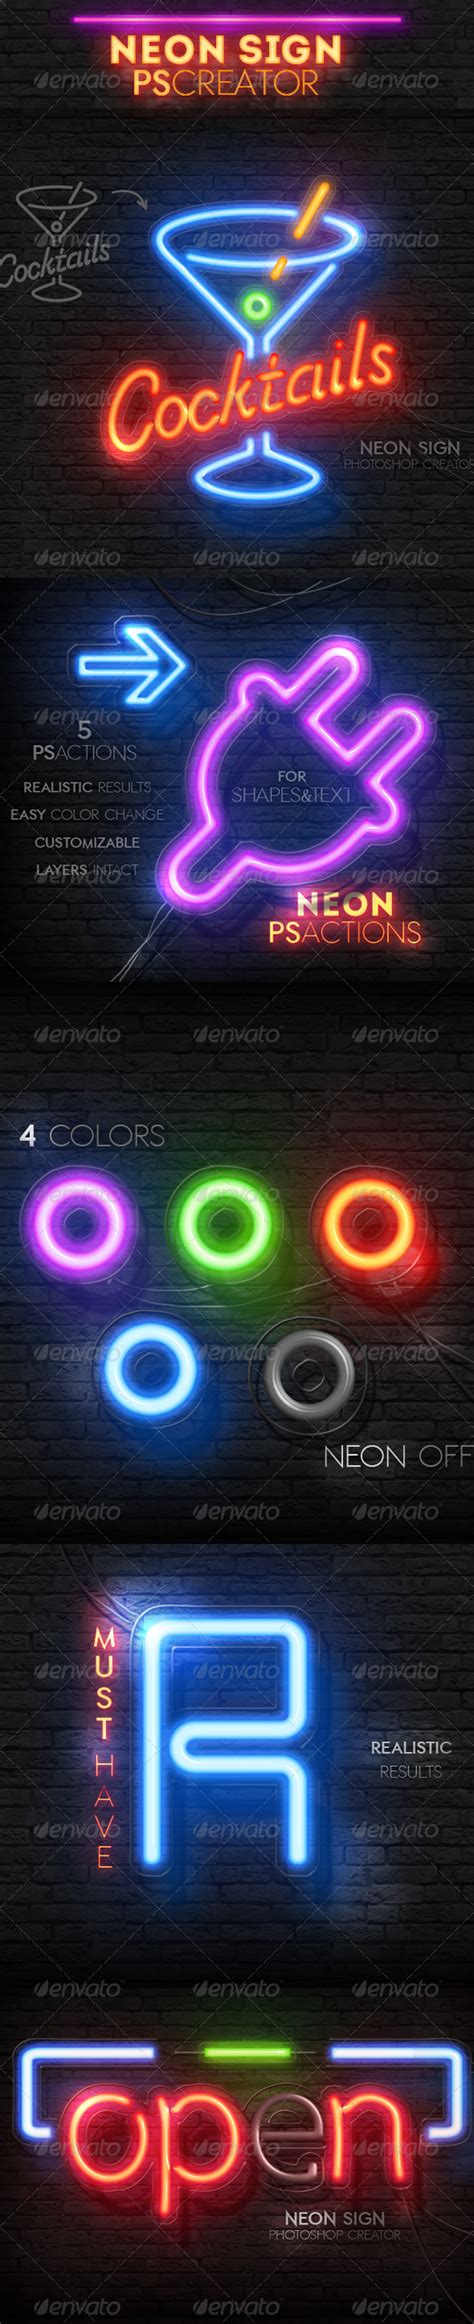 Neon Light Sign Photoshop Actions By Psddude Graphicriver